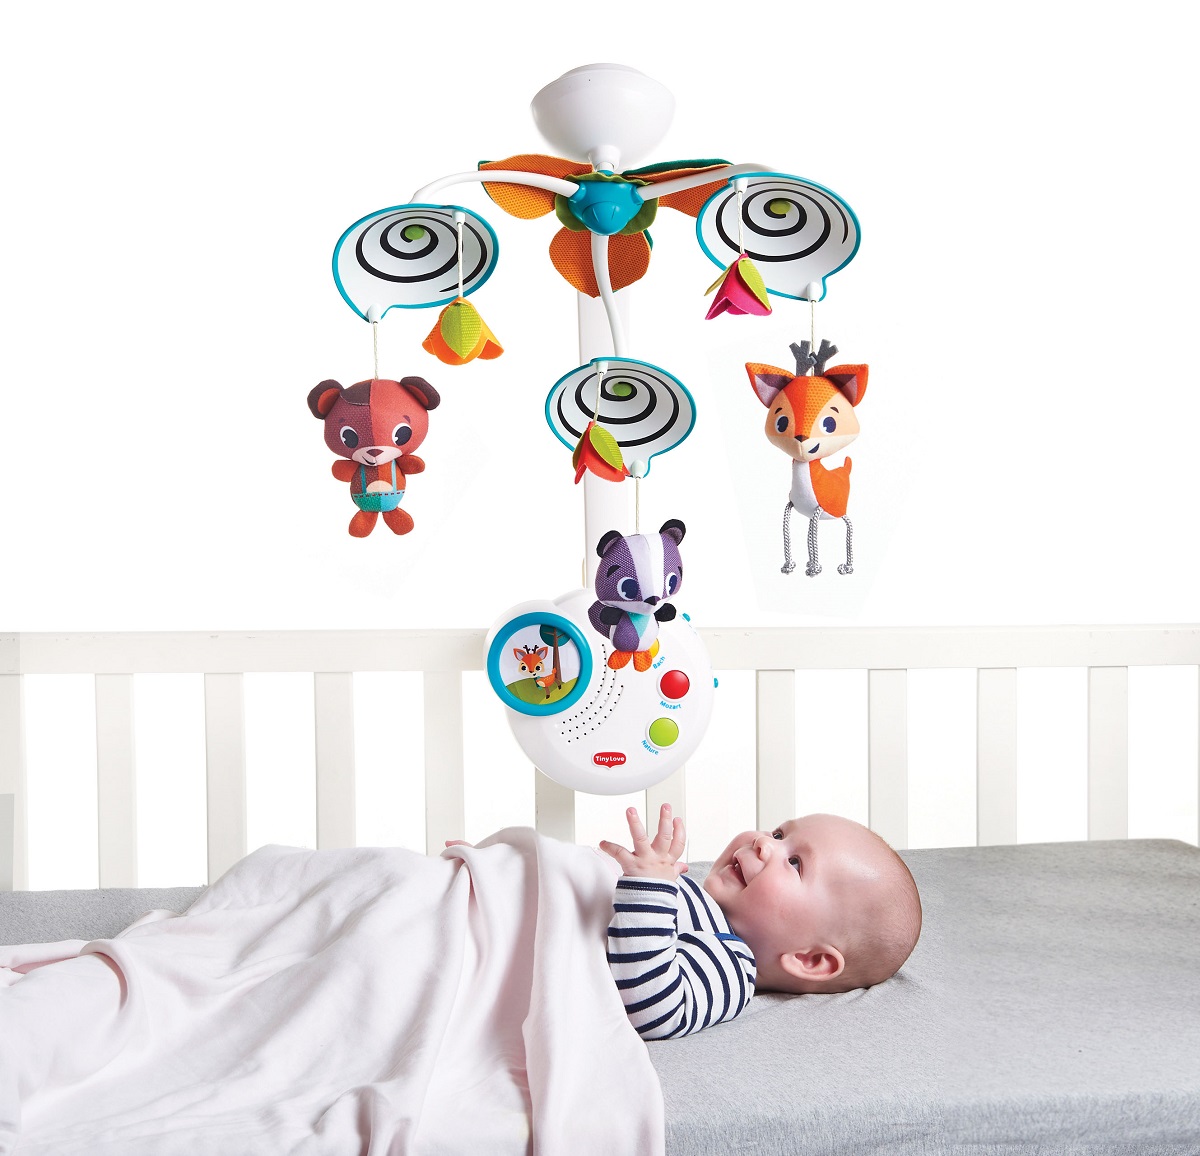 5 Benefits Of A Cot Mobile For Baby Development